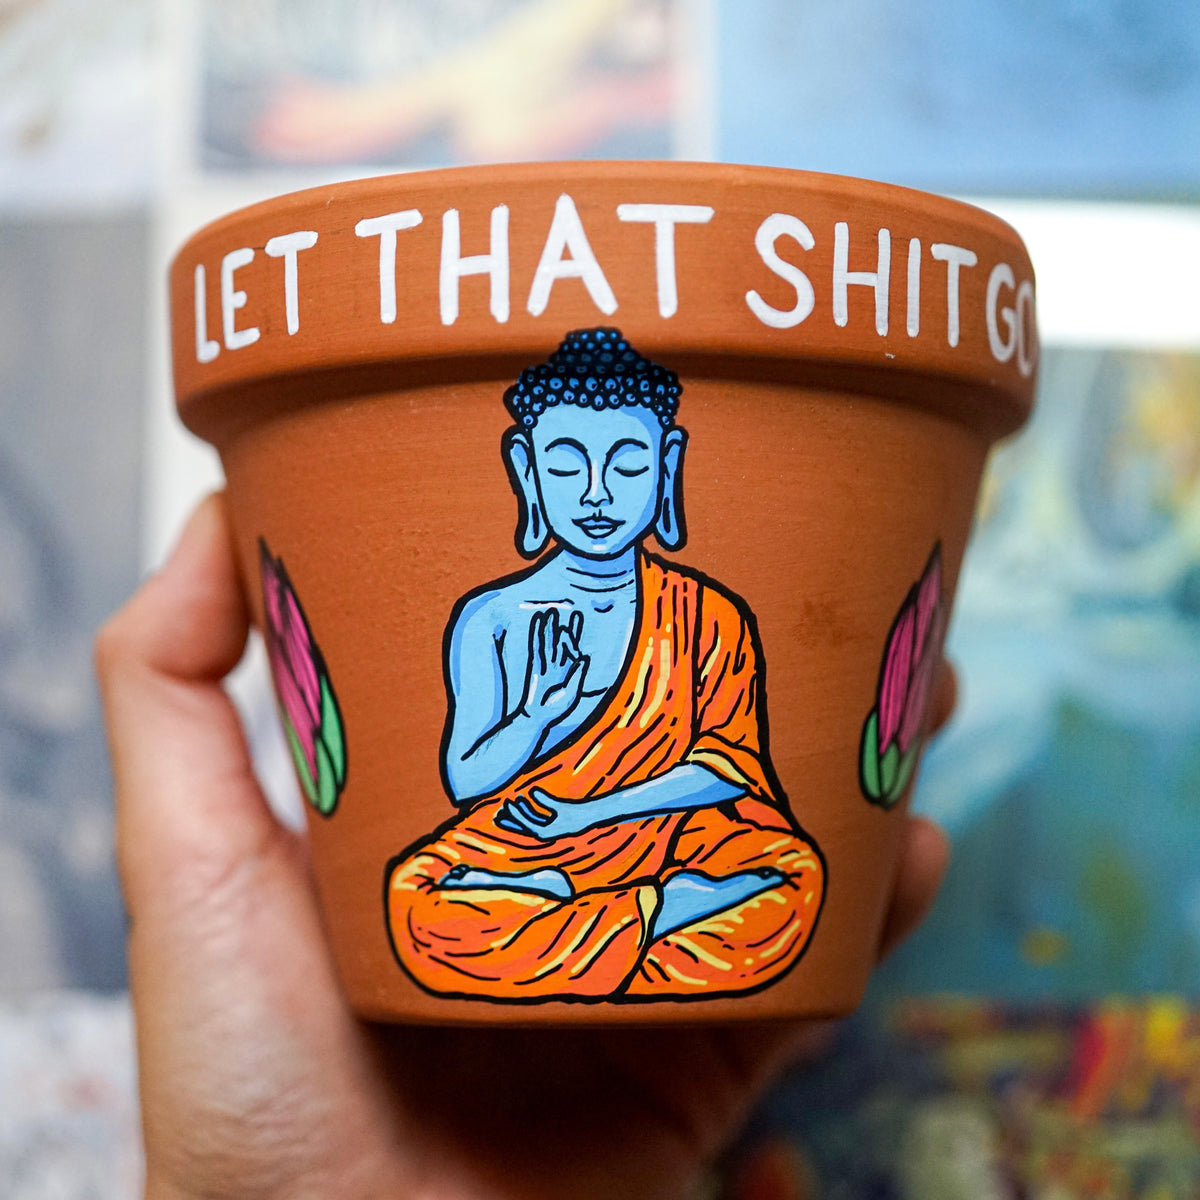 Let That Shit Go Hand Painted Clay Pot